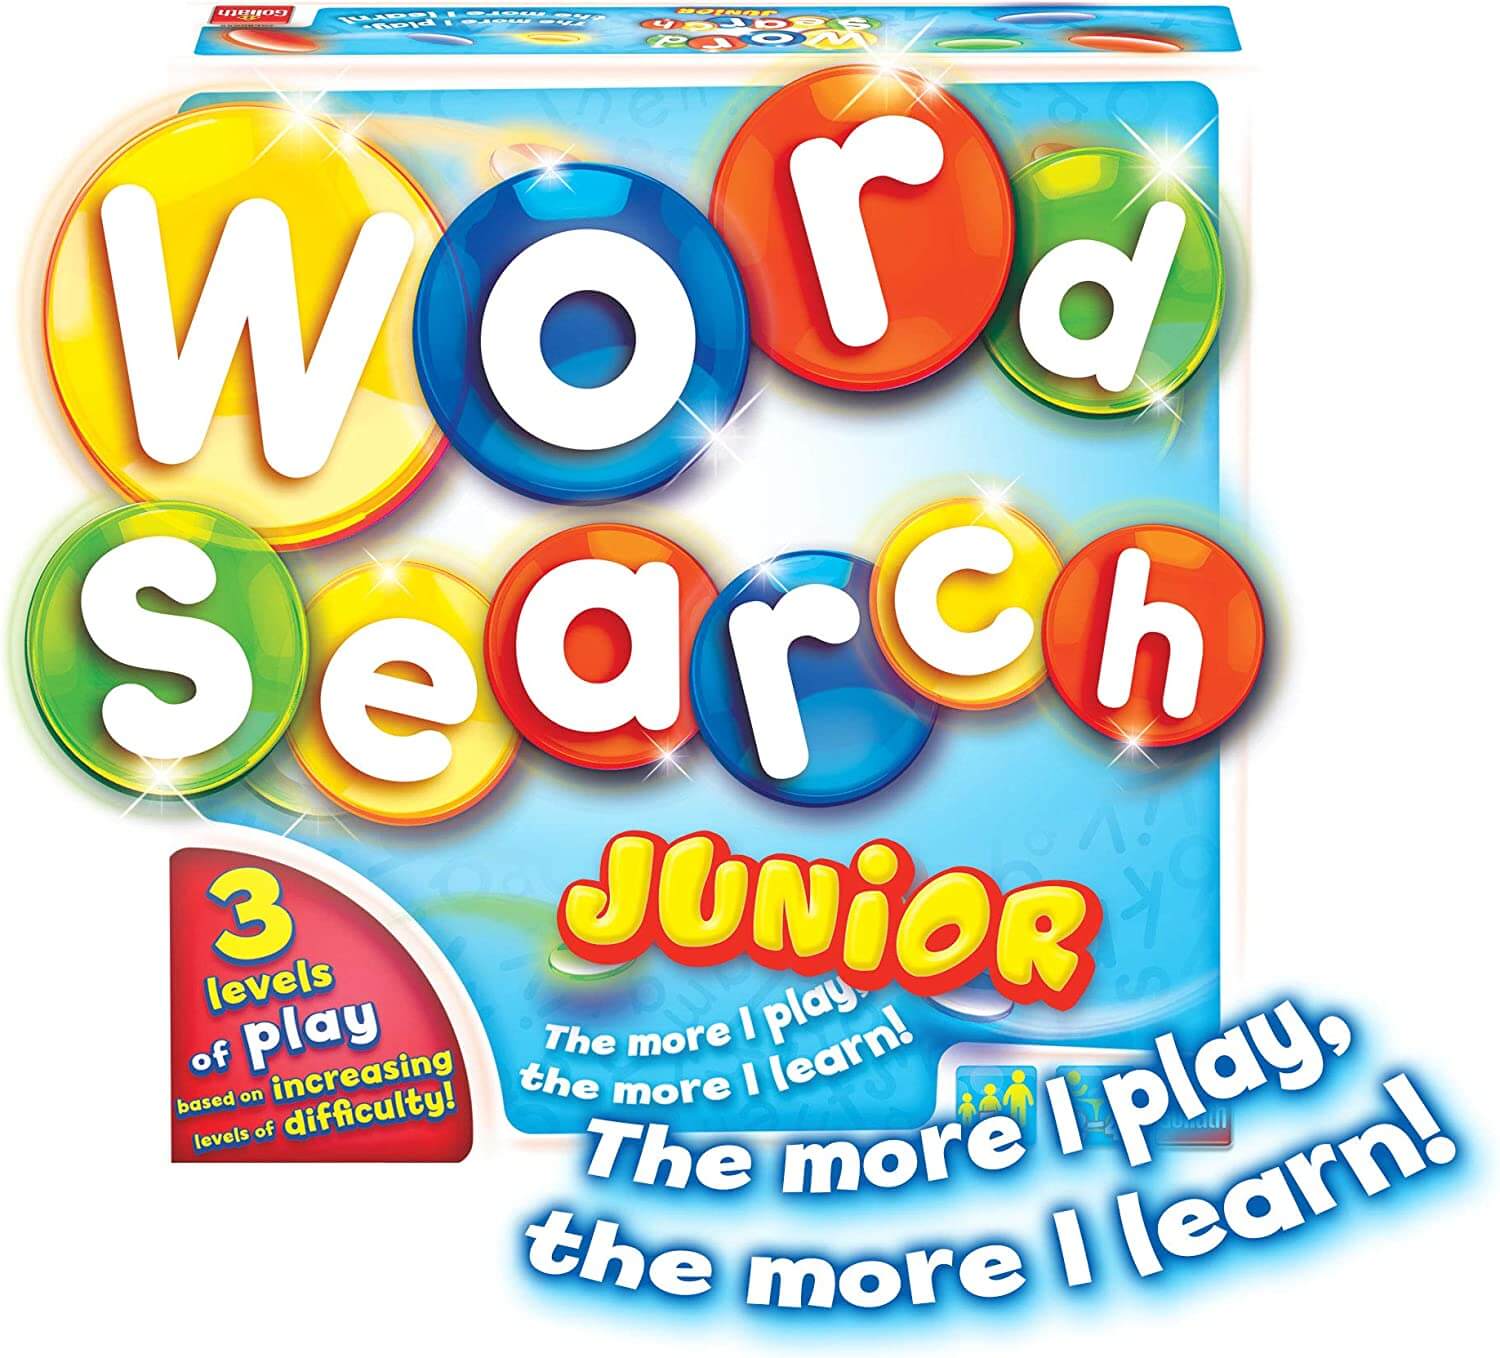 Exciting word and picture game for kids - Wordsearch Junior - Vivid Golaith